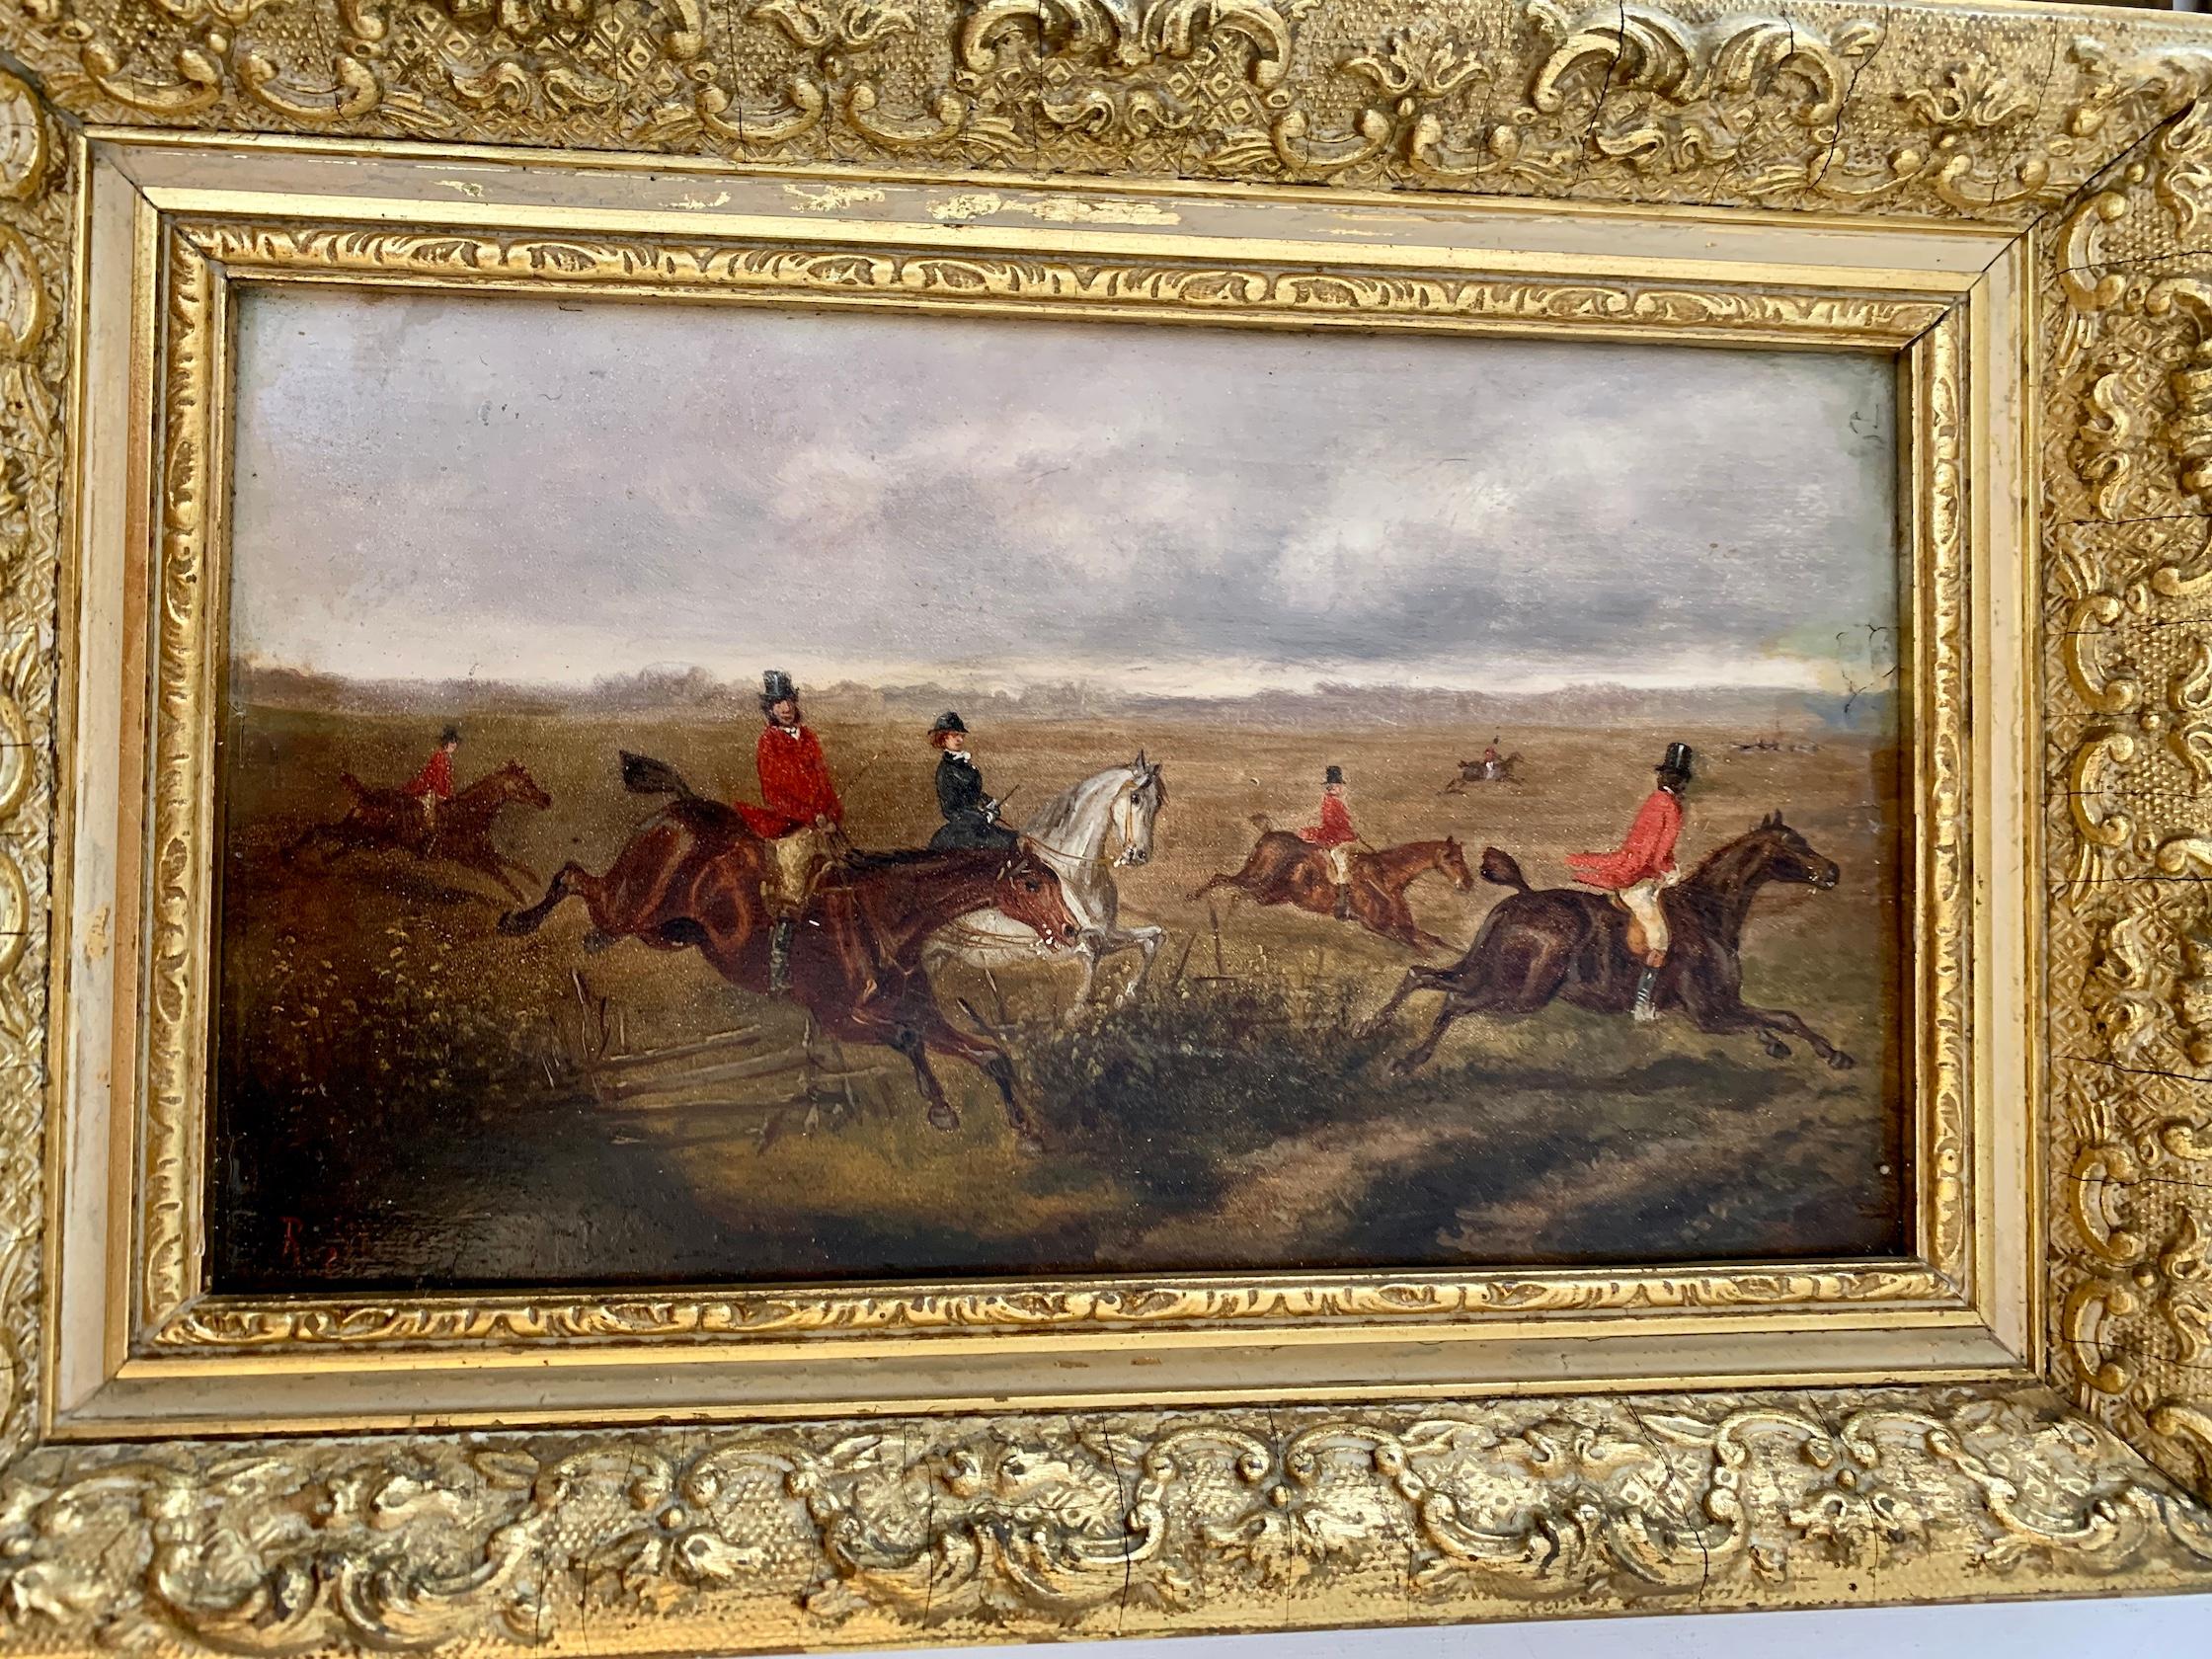 19th century Set of 4 Fox hunting scenes in a landscape, with hounds, huntsmen 1